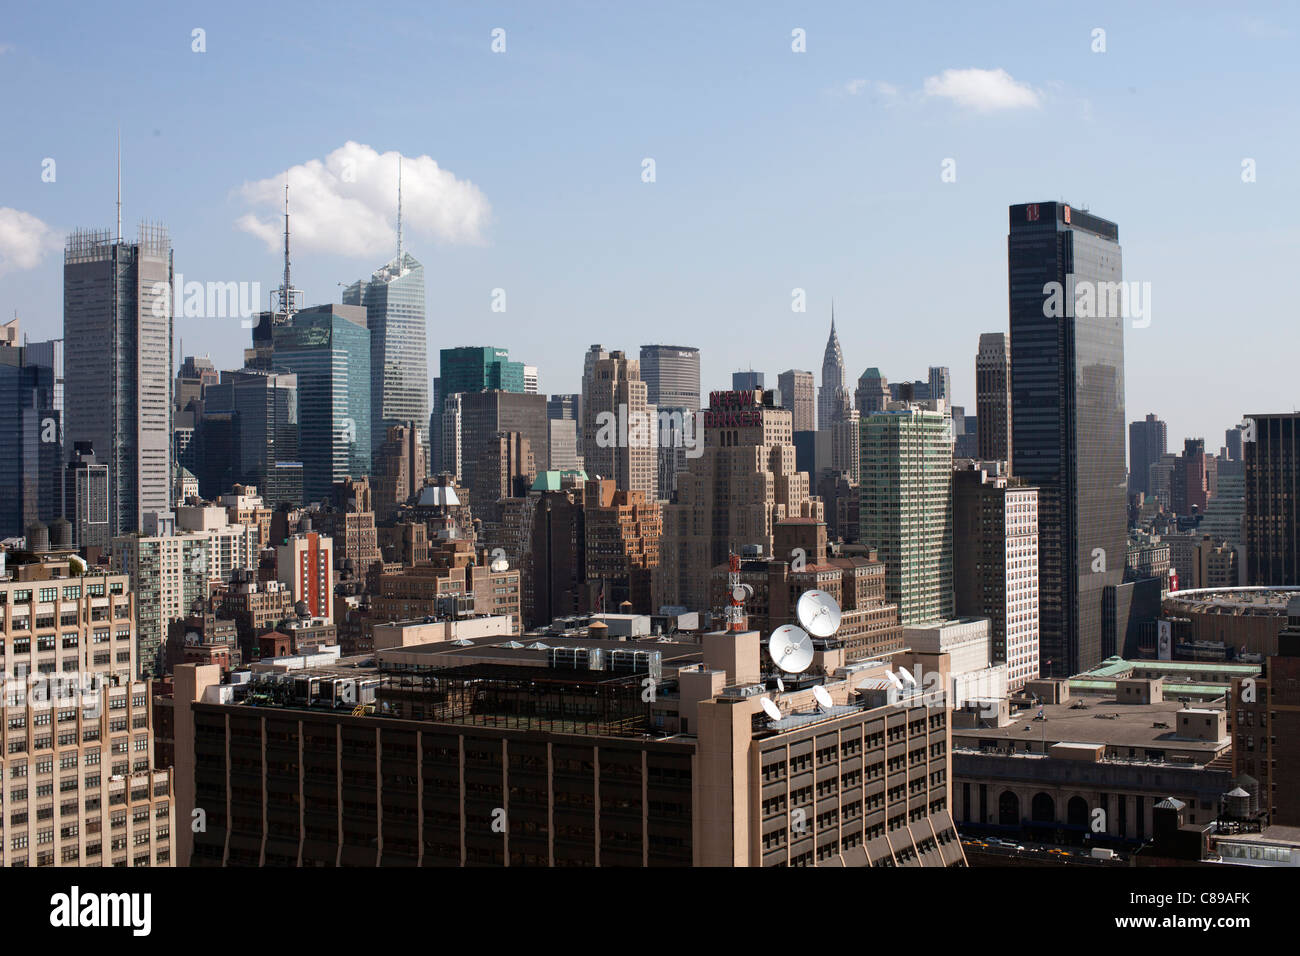 skycrapers and towers in manhattan skyline view Stock Photo